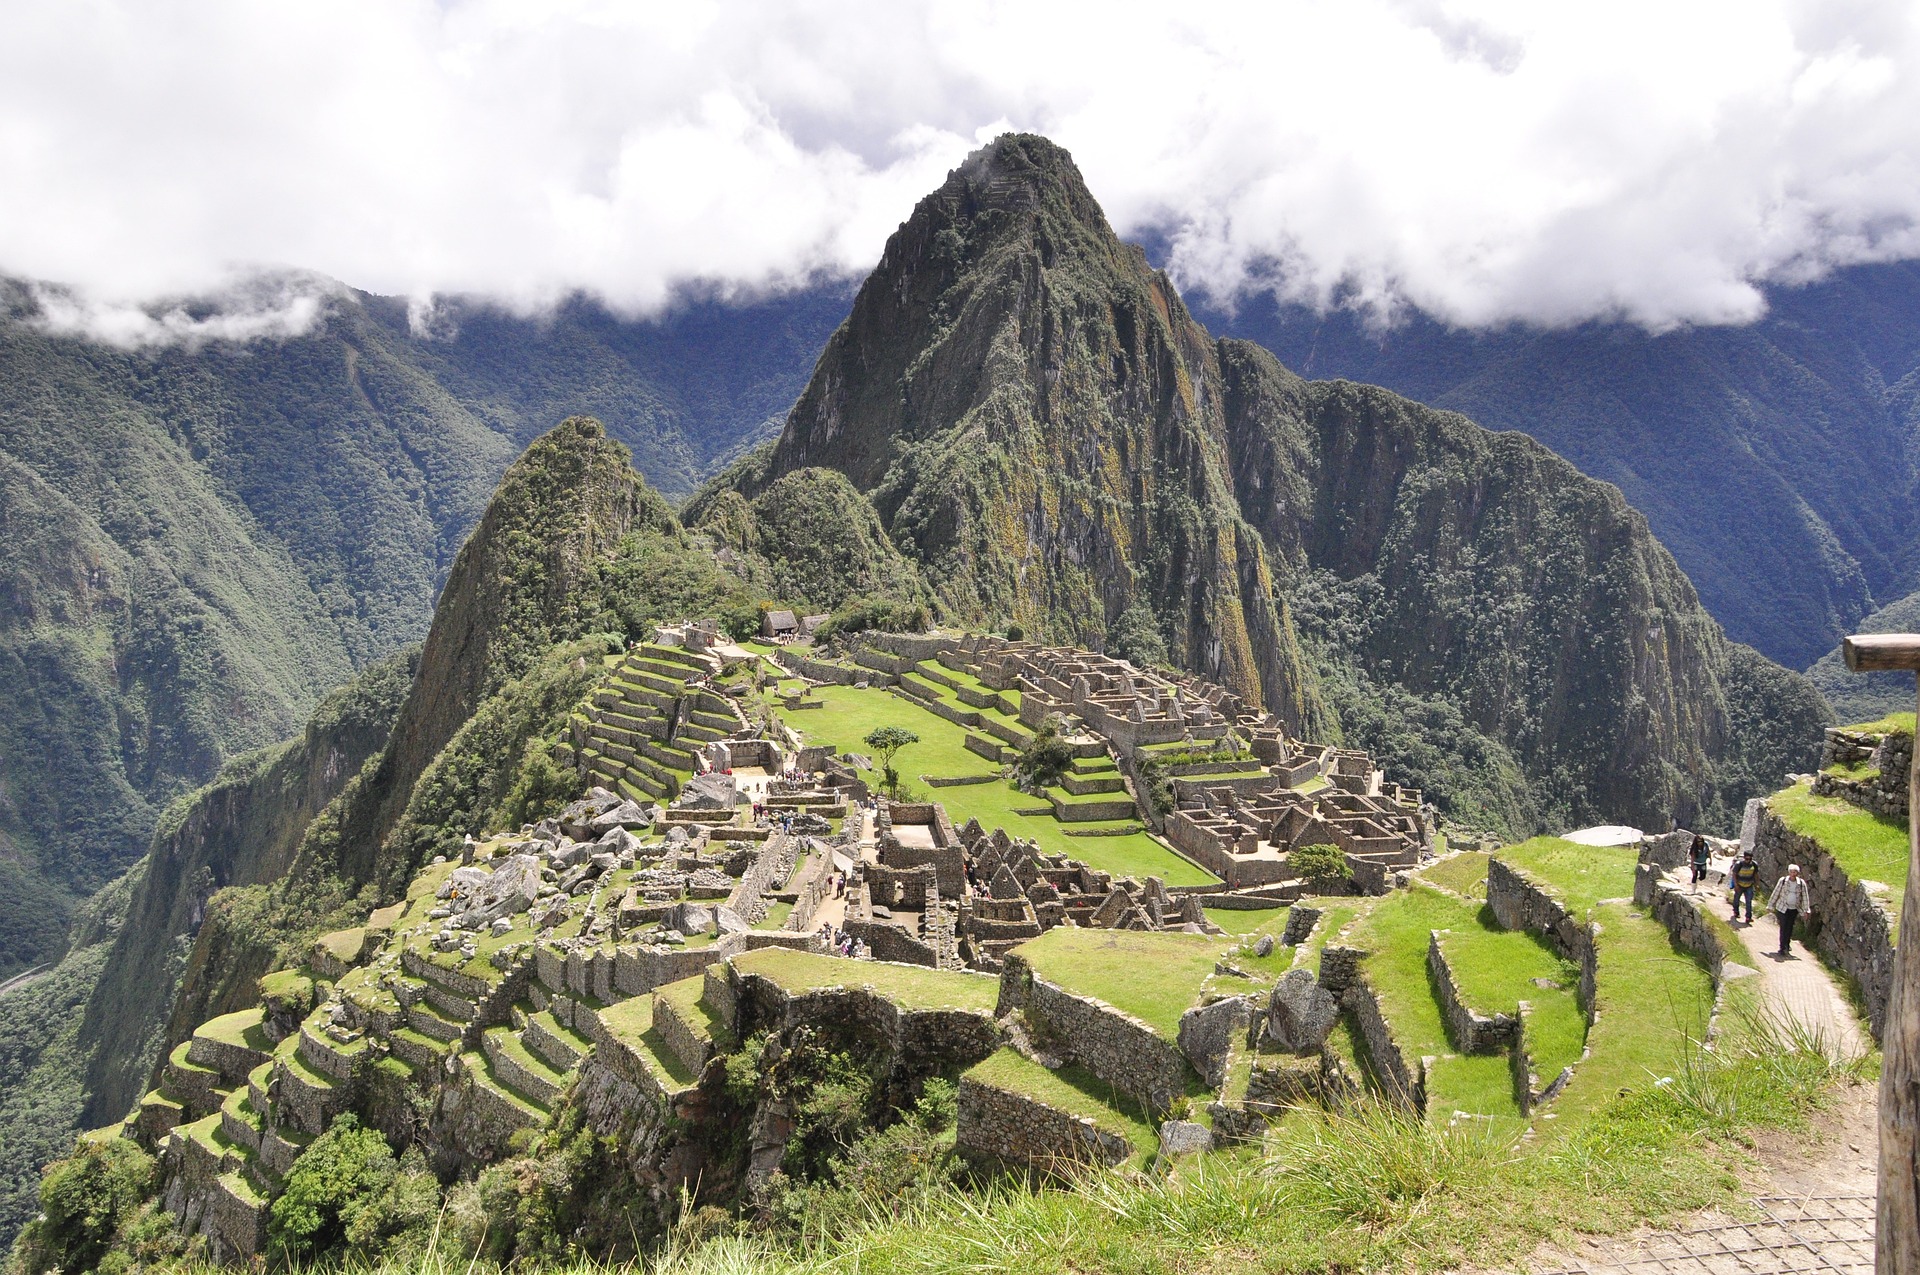 The Tour of the holy city of Machu Picchu is temporarly shut down